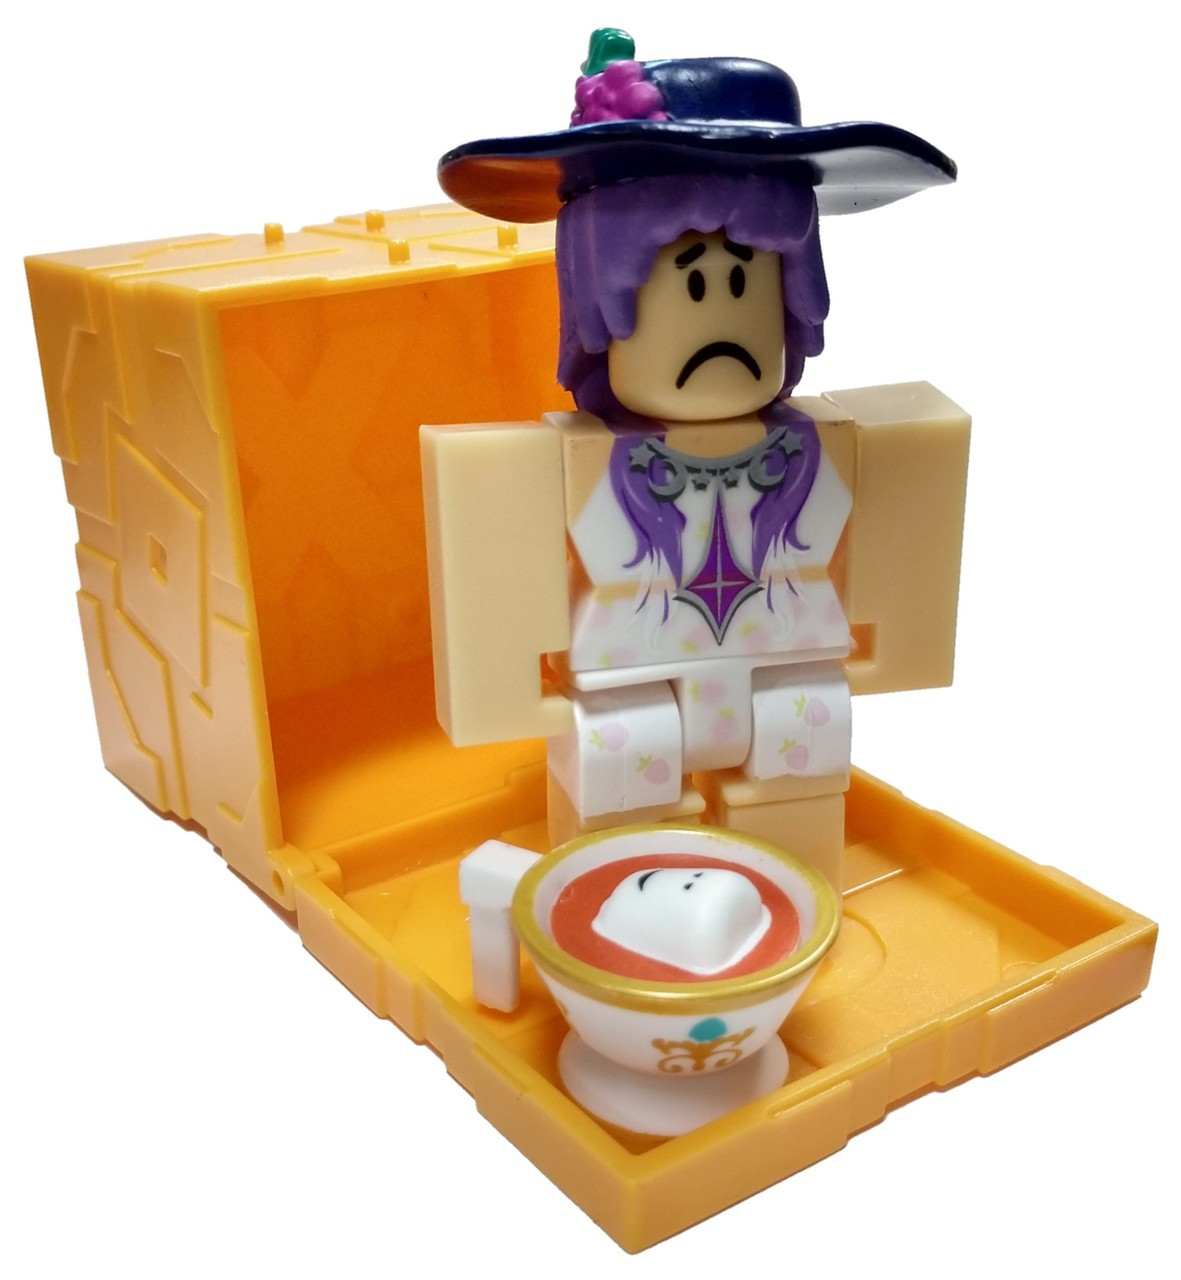 Series 5 Roblox Titanic Socialite Mini Figure With Gold Cube And Online Code Loose - roblox character 5